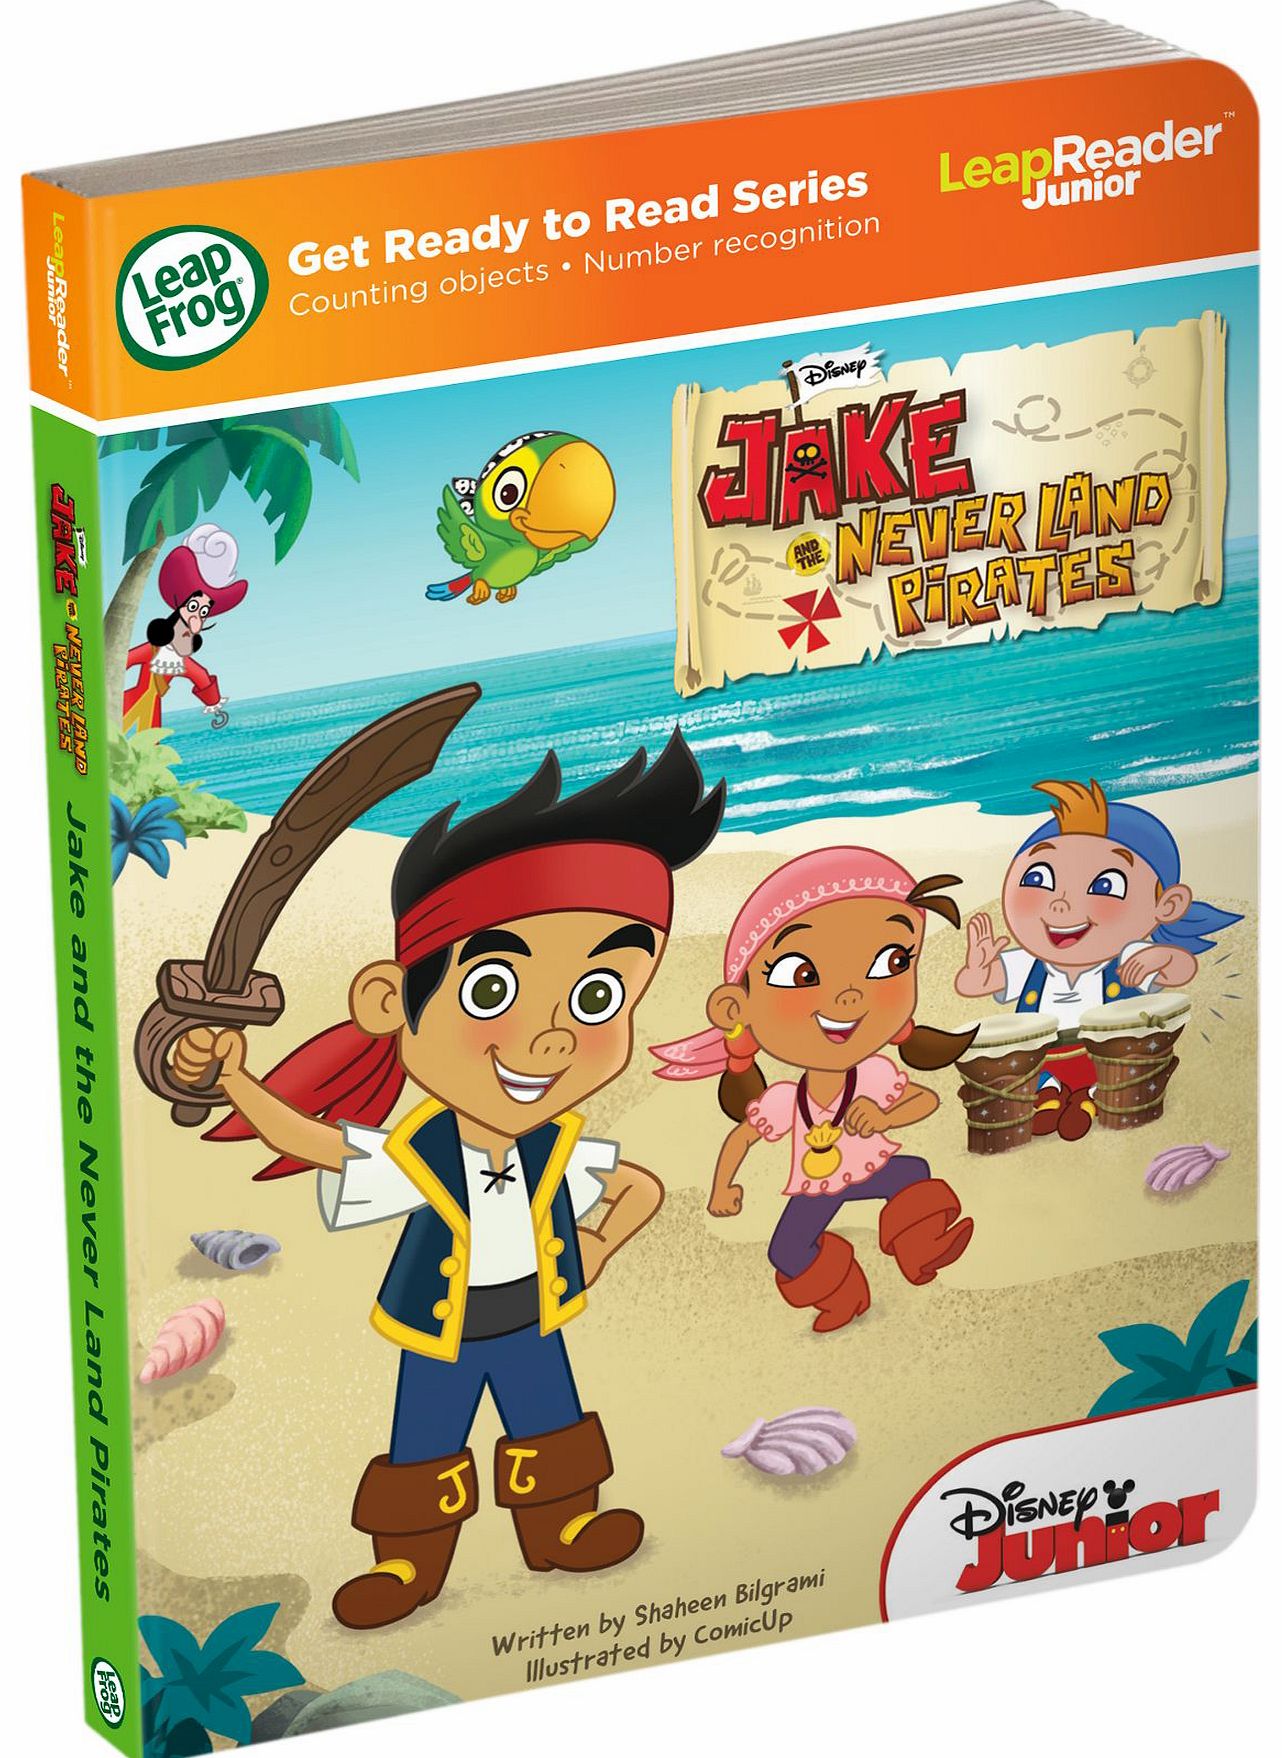 Tag Junior Book Jake & the Neverland